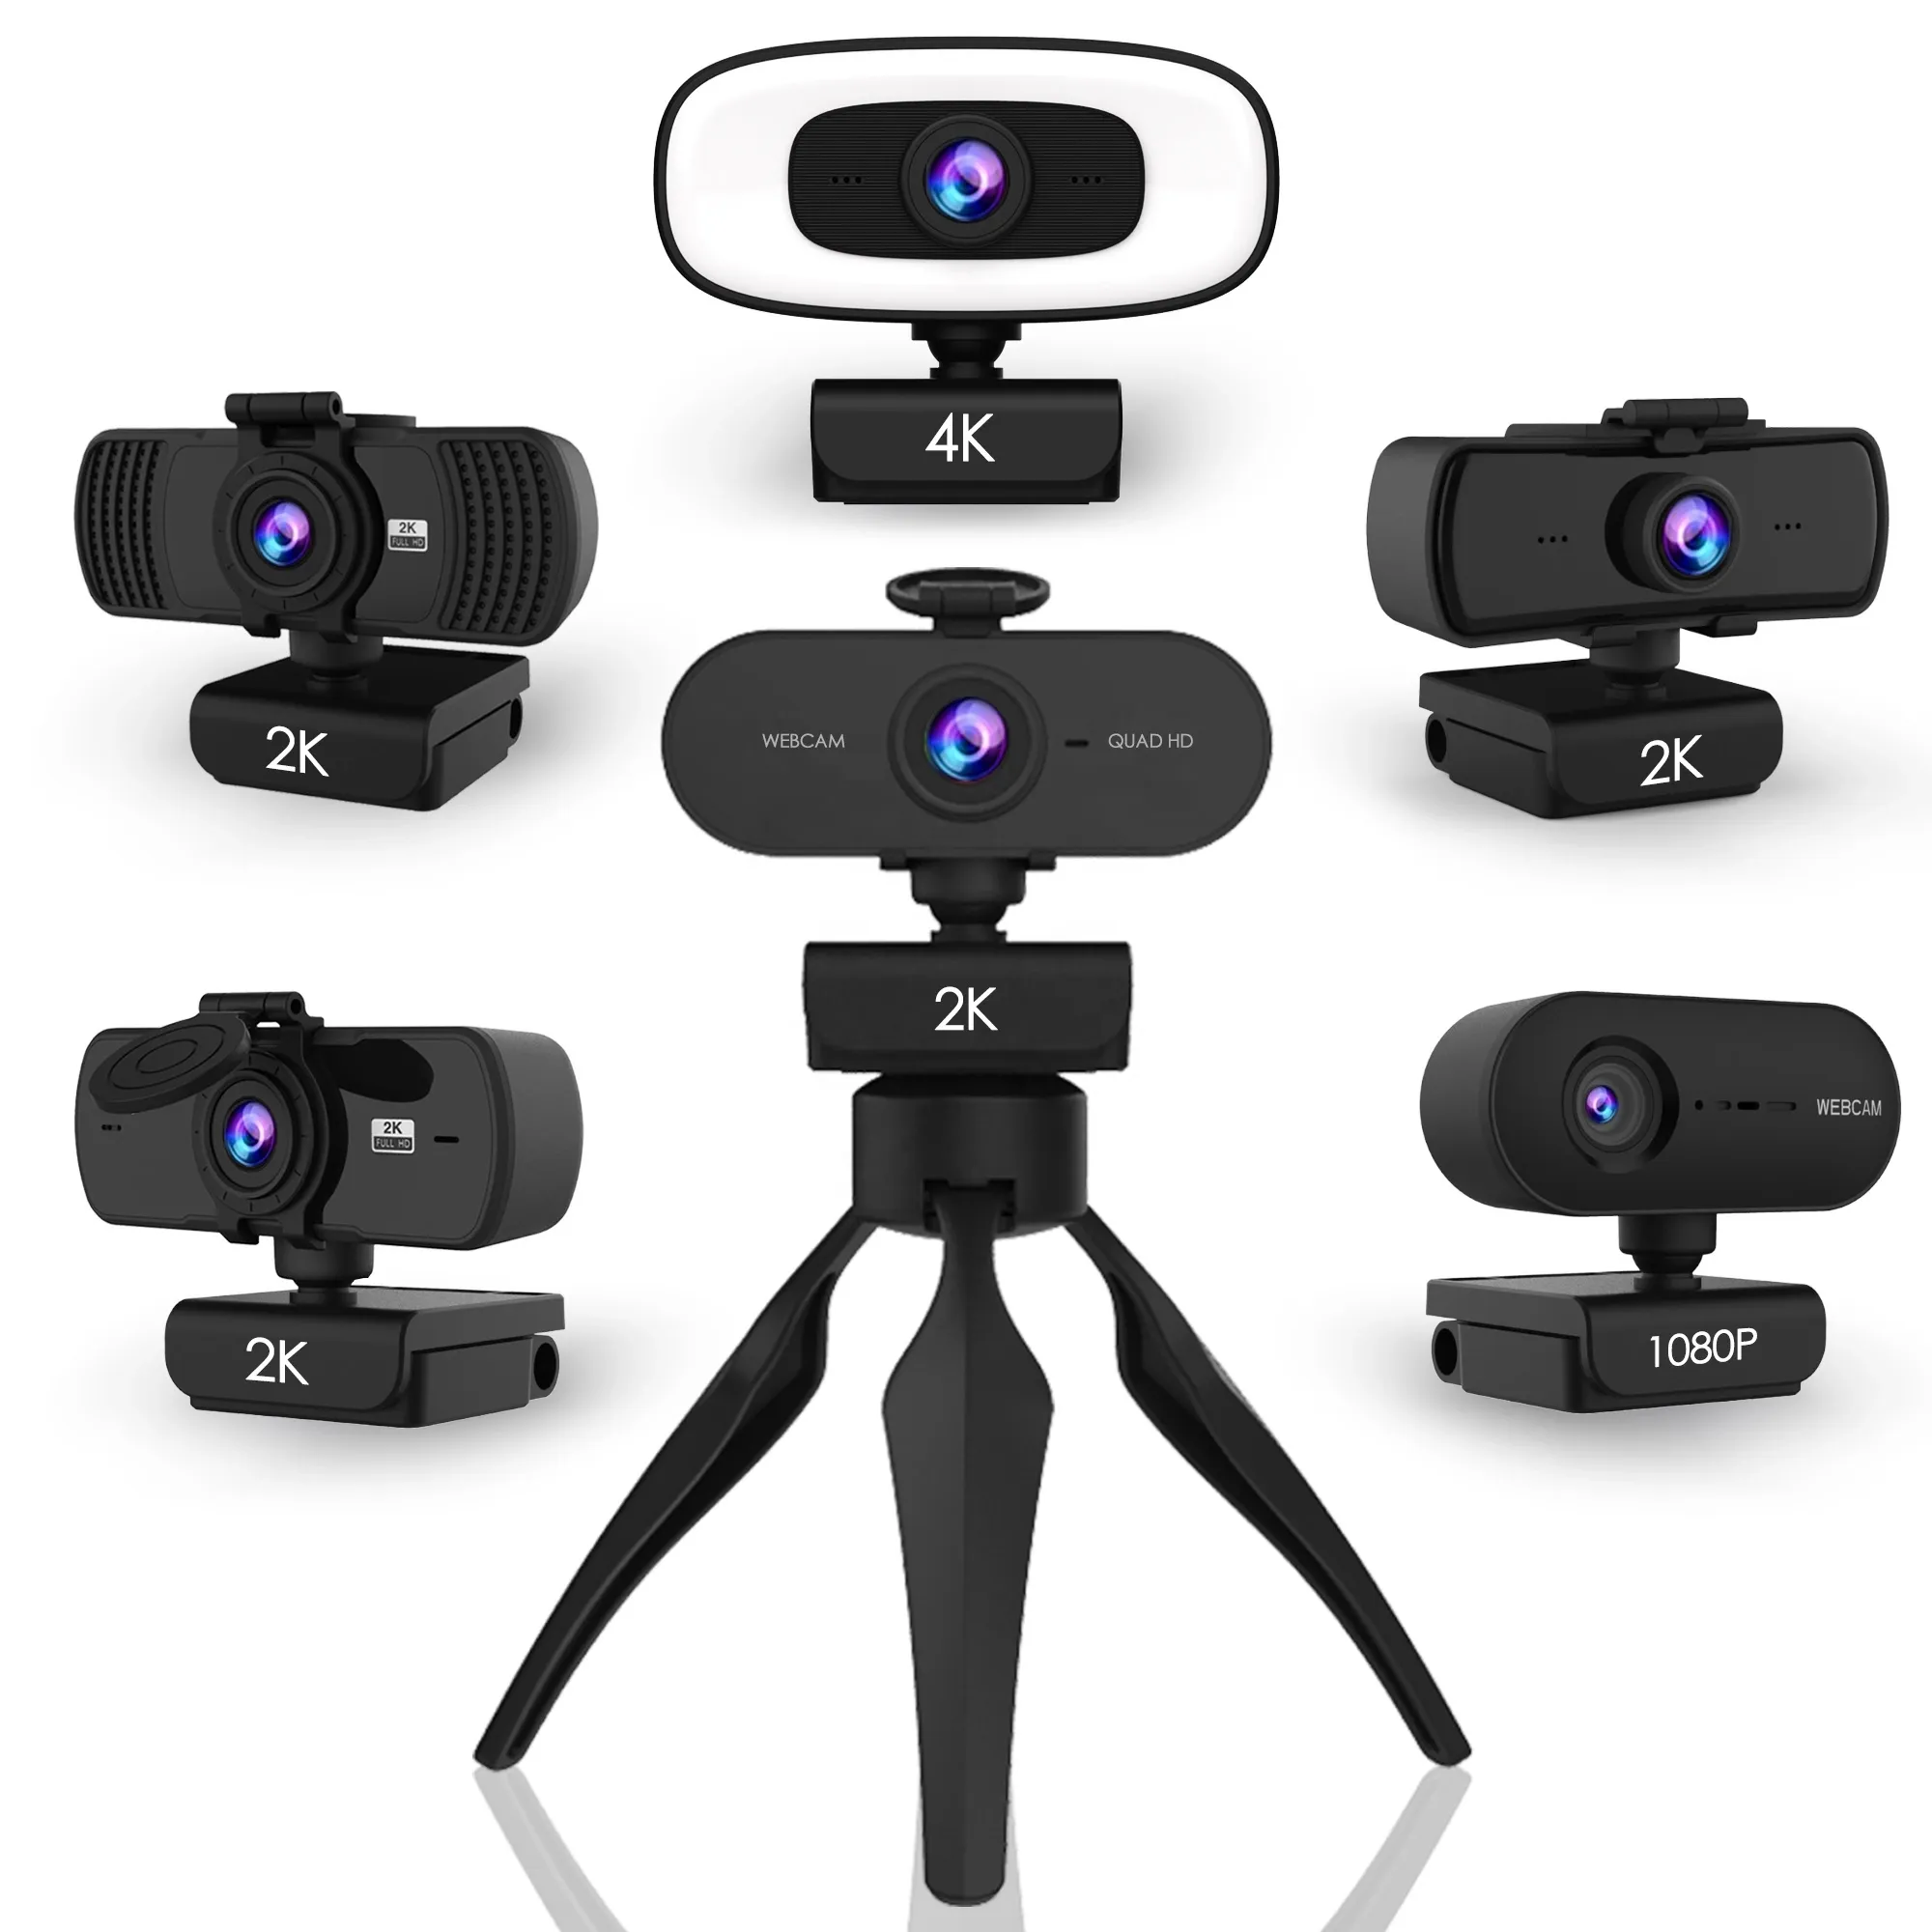 1080P Webcam HD Autofocus Webcam Computer Camera with Mic for Video Calling Conferencing School education study test